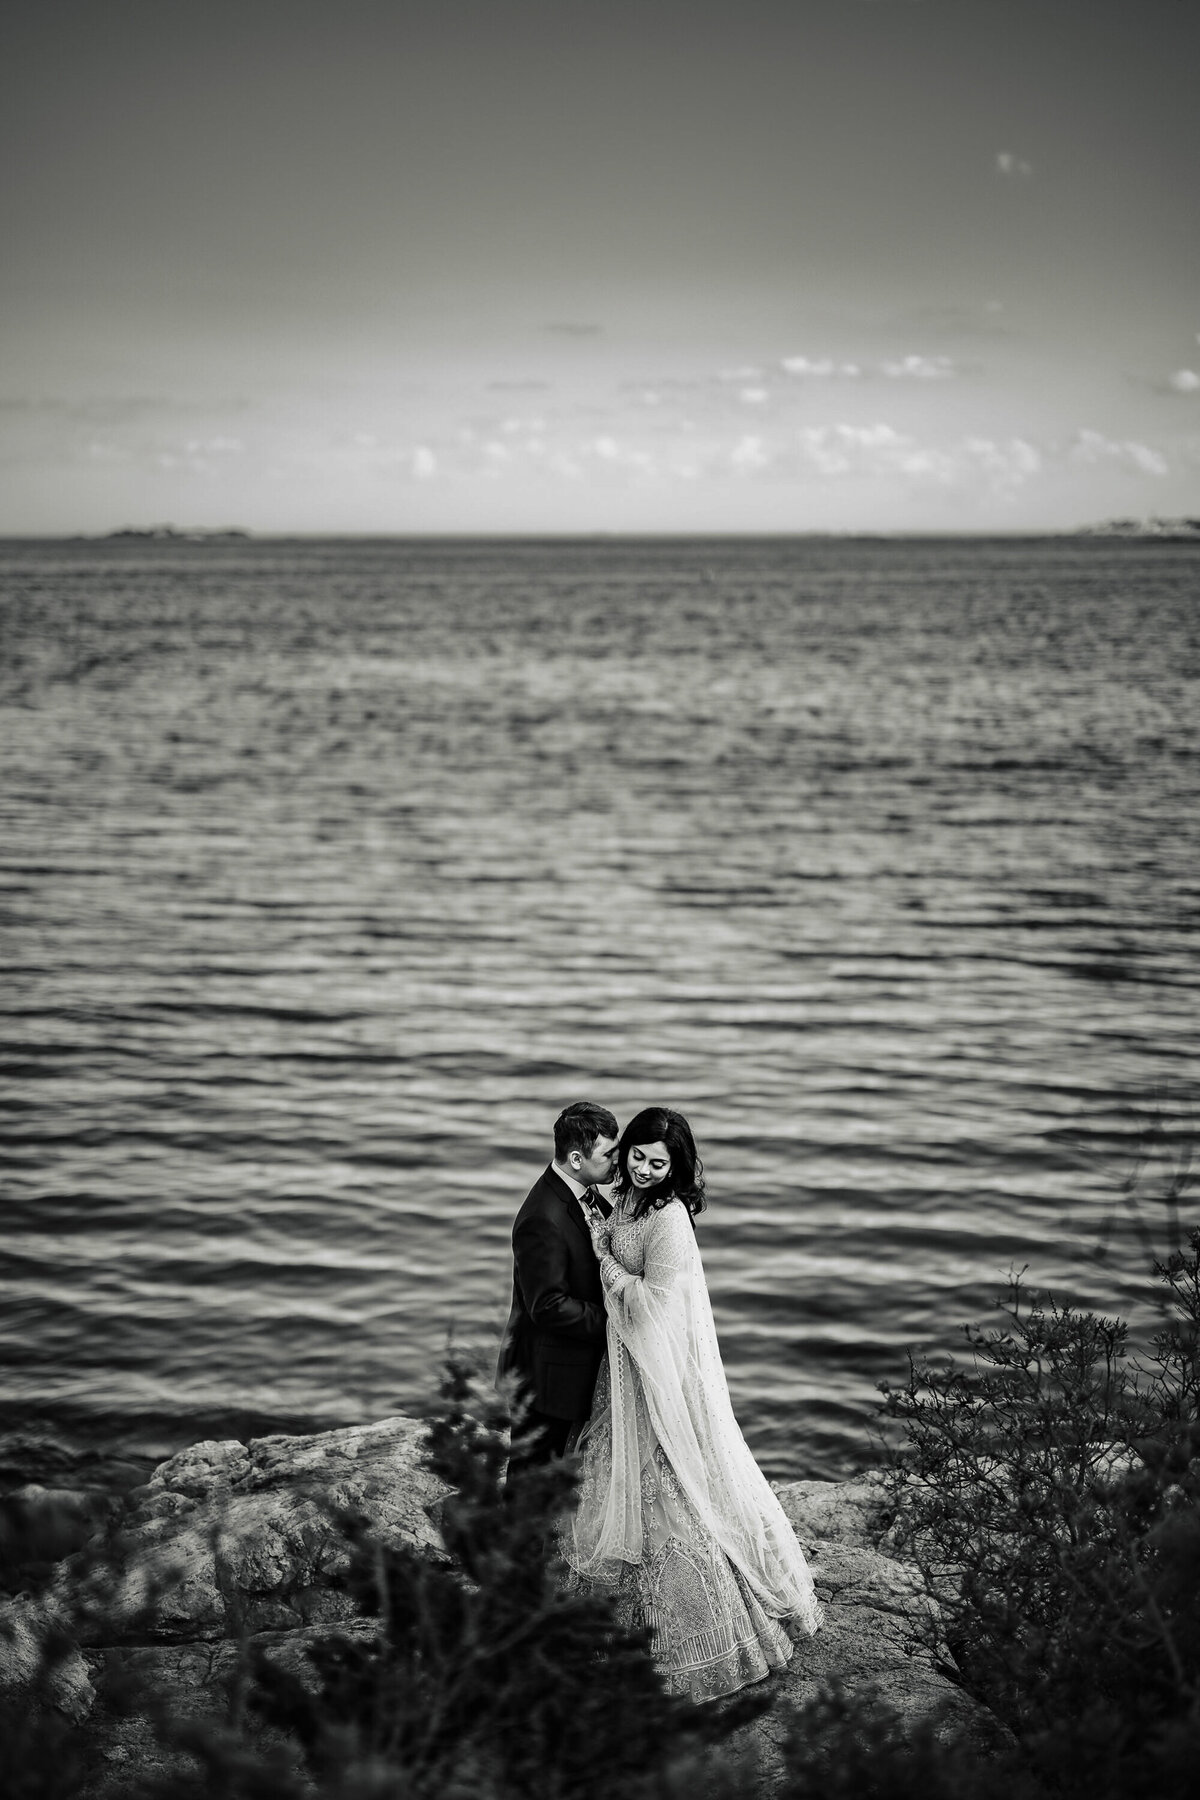 Ishan Fotografi is a premium photography studio serving South Jersey weddings.